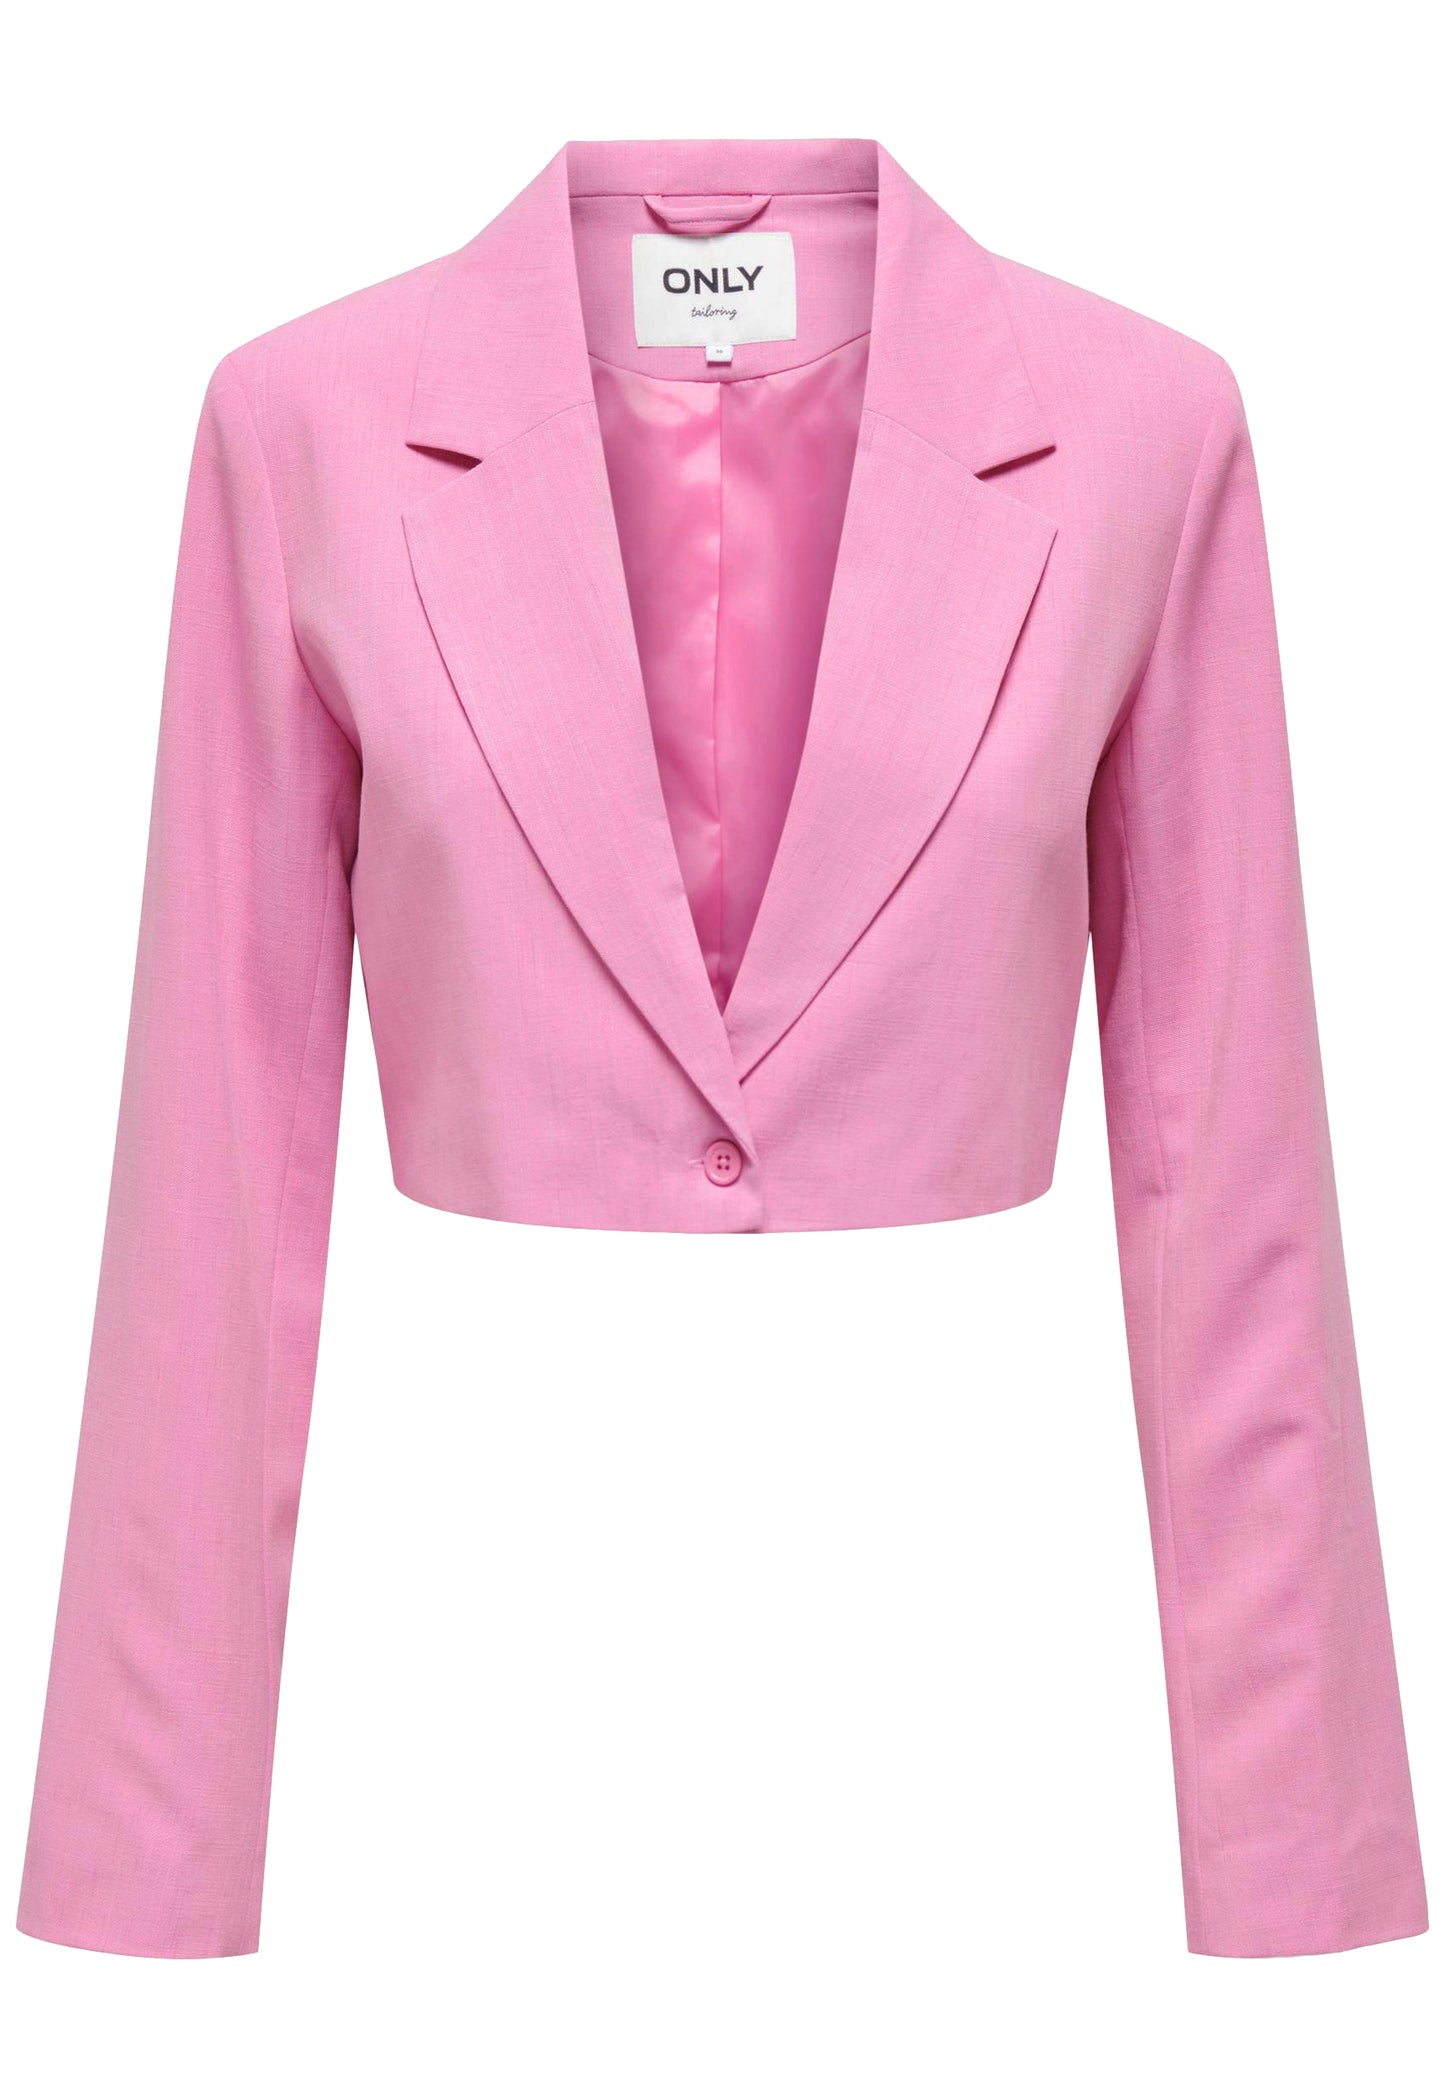 ONLY Brigitta Cropped Suit Co-ord Blazer in Pink - concretebartops